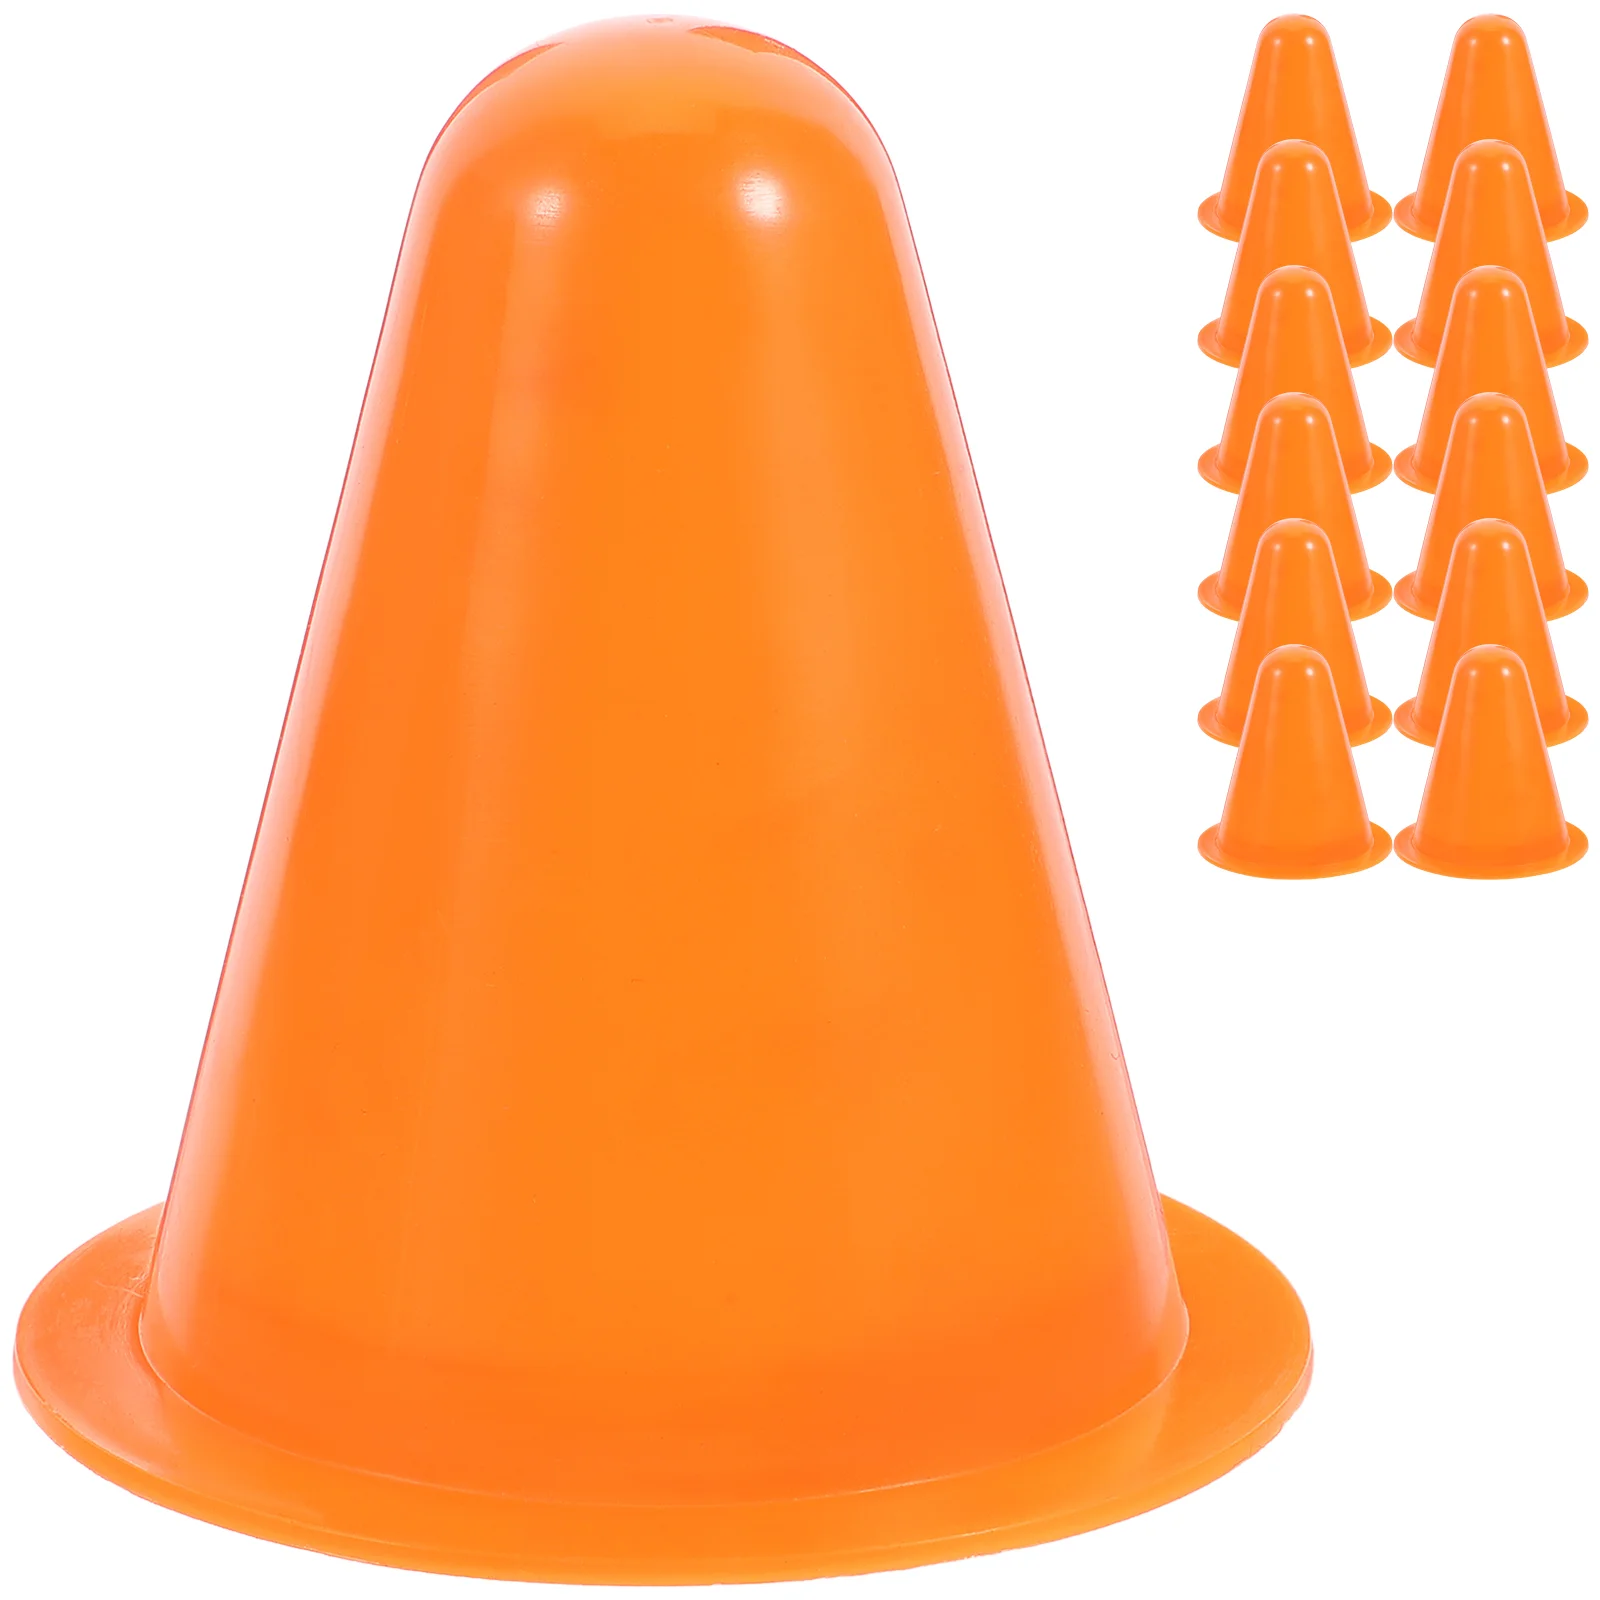 20 Pcs Roller Skating Pile Skates Training Prop Sign Stakes Indoor Plastic Cones Soccer